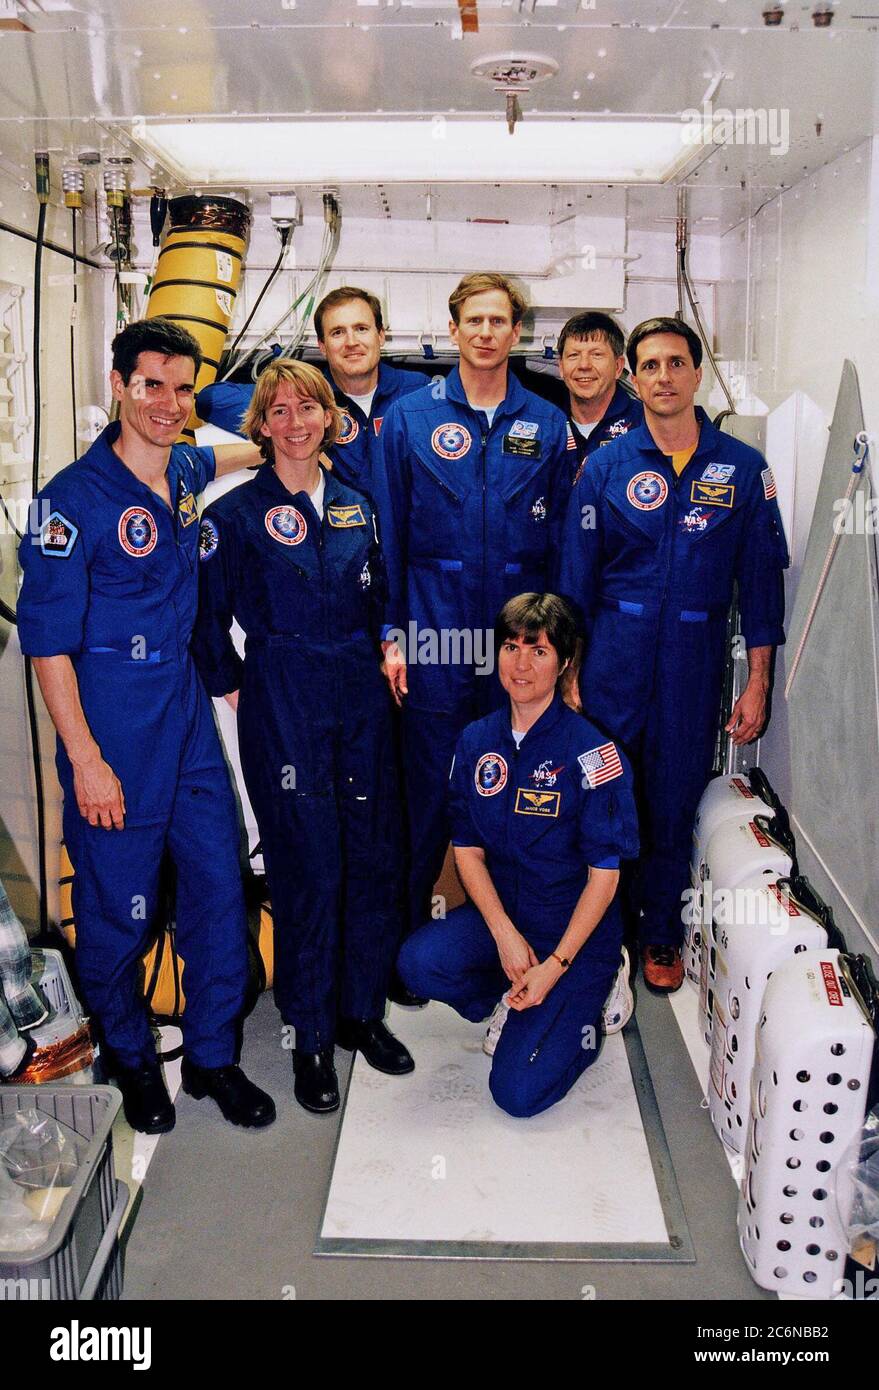 The STS-83 crew poses in the White Room at Launch Complex 39A during the crew's Terminal Countdown Demonstration Test (TCDT). From left to right, standing, they are Payload Specialist Gregory T. Linteris, Pilot Susan L. Still, Mission Commander James D. Halsell, Mission Specialist Michael L. Gernhardt, Payload Specialist Roger K. Crouch, and Mission Specialist Donald Thomas. Mission Specialist Janice E. Voss is kneeling Stock Photo